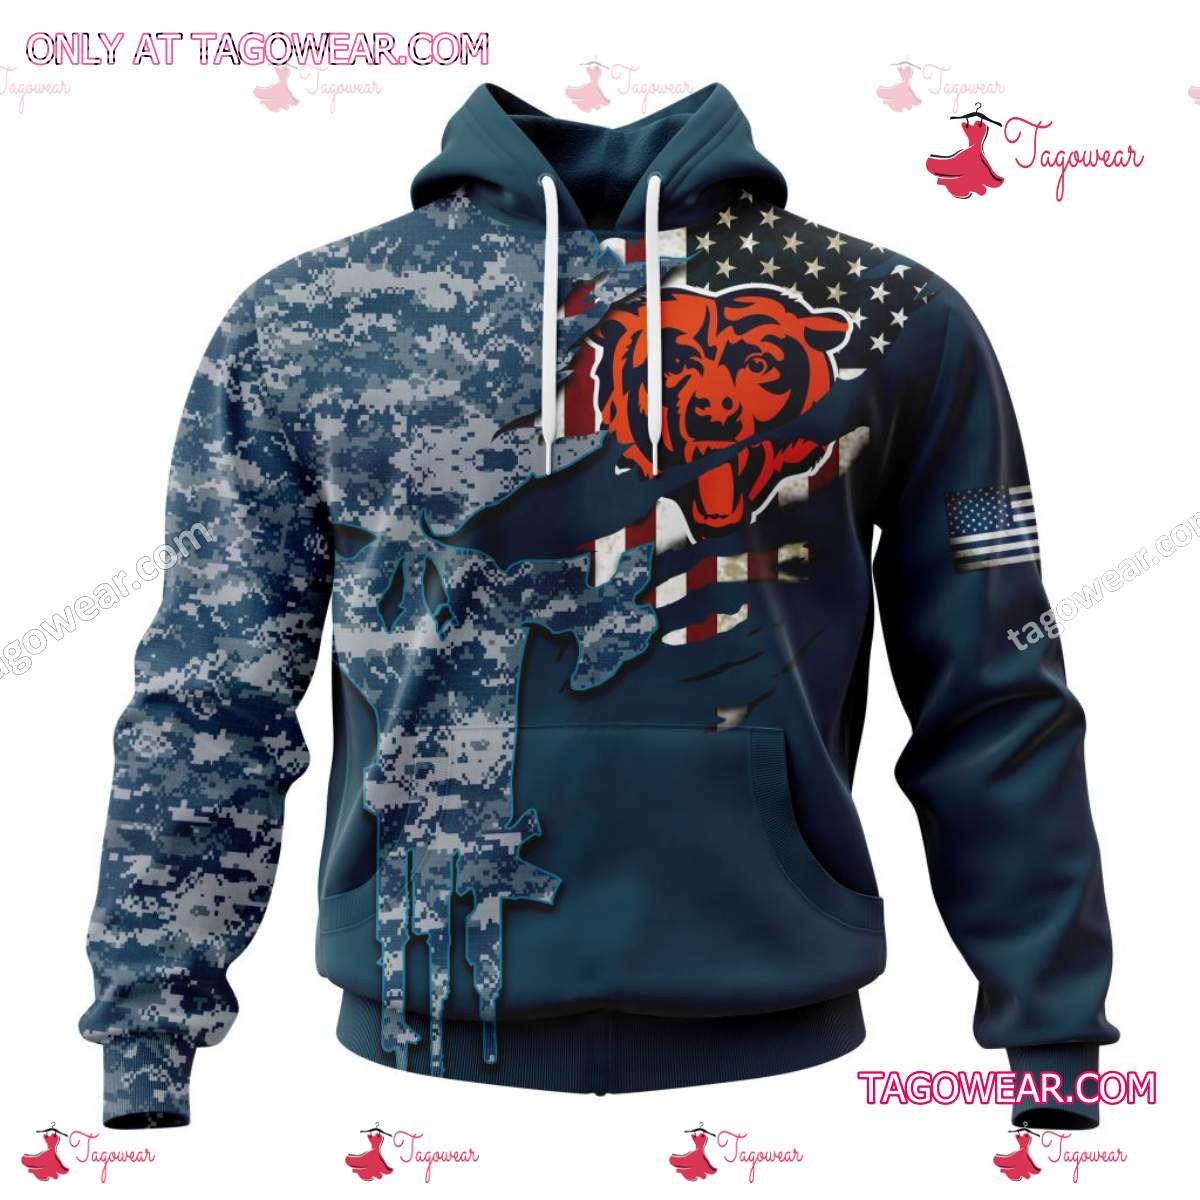 Chicago Bears NFL America's Navy Camo Skull Personalized Apparels